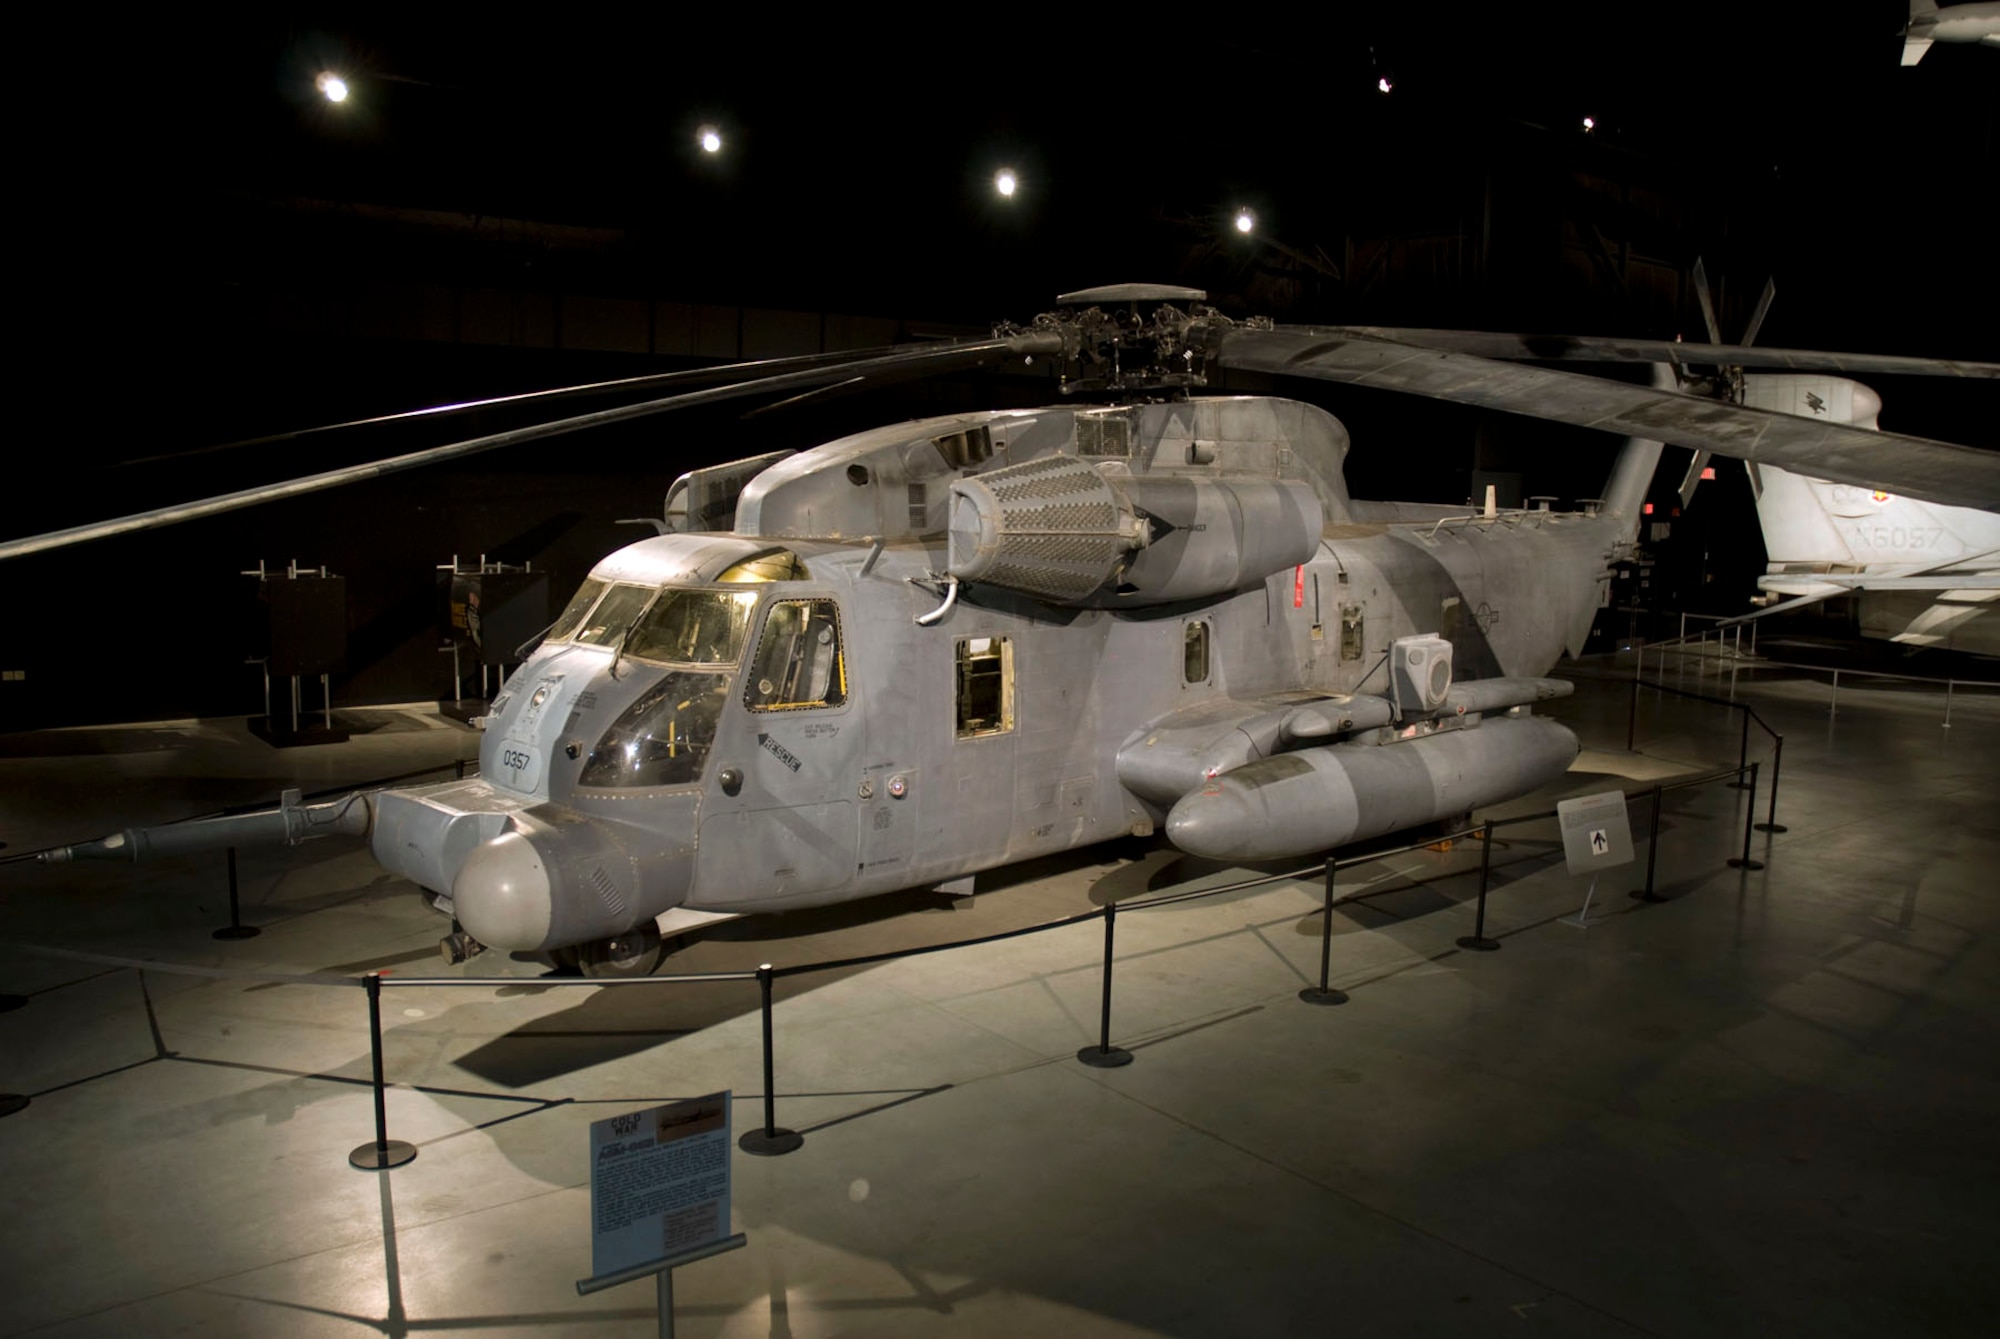 DAYTON, Ohio - Sikorsky MH-53M Pave Low IV on display in the Cold War Gallery at the National Museum of the U.S. Air Force. (U.S. Air Force photo)